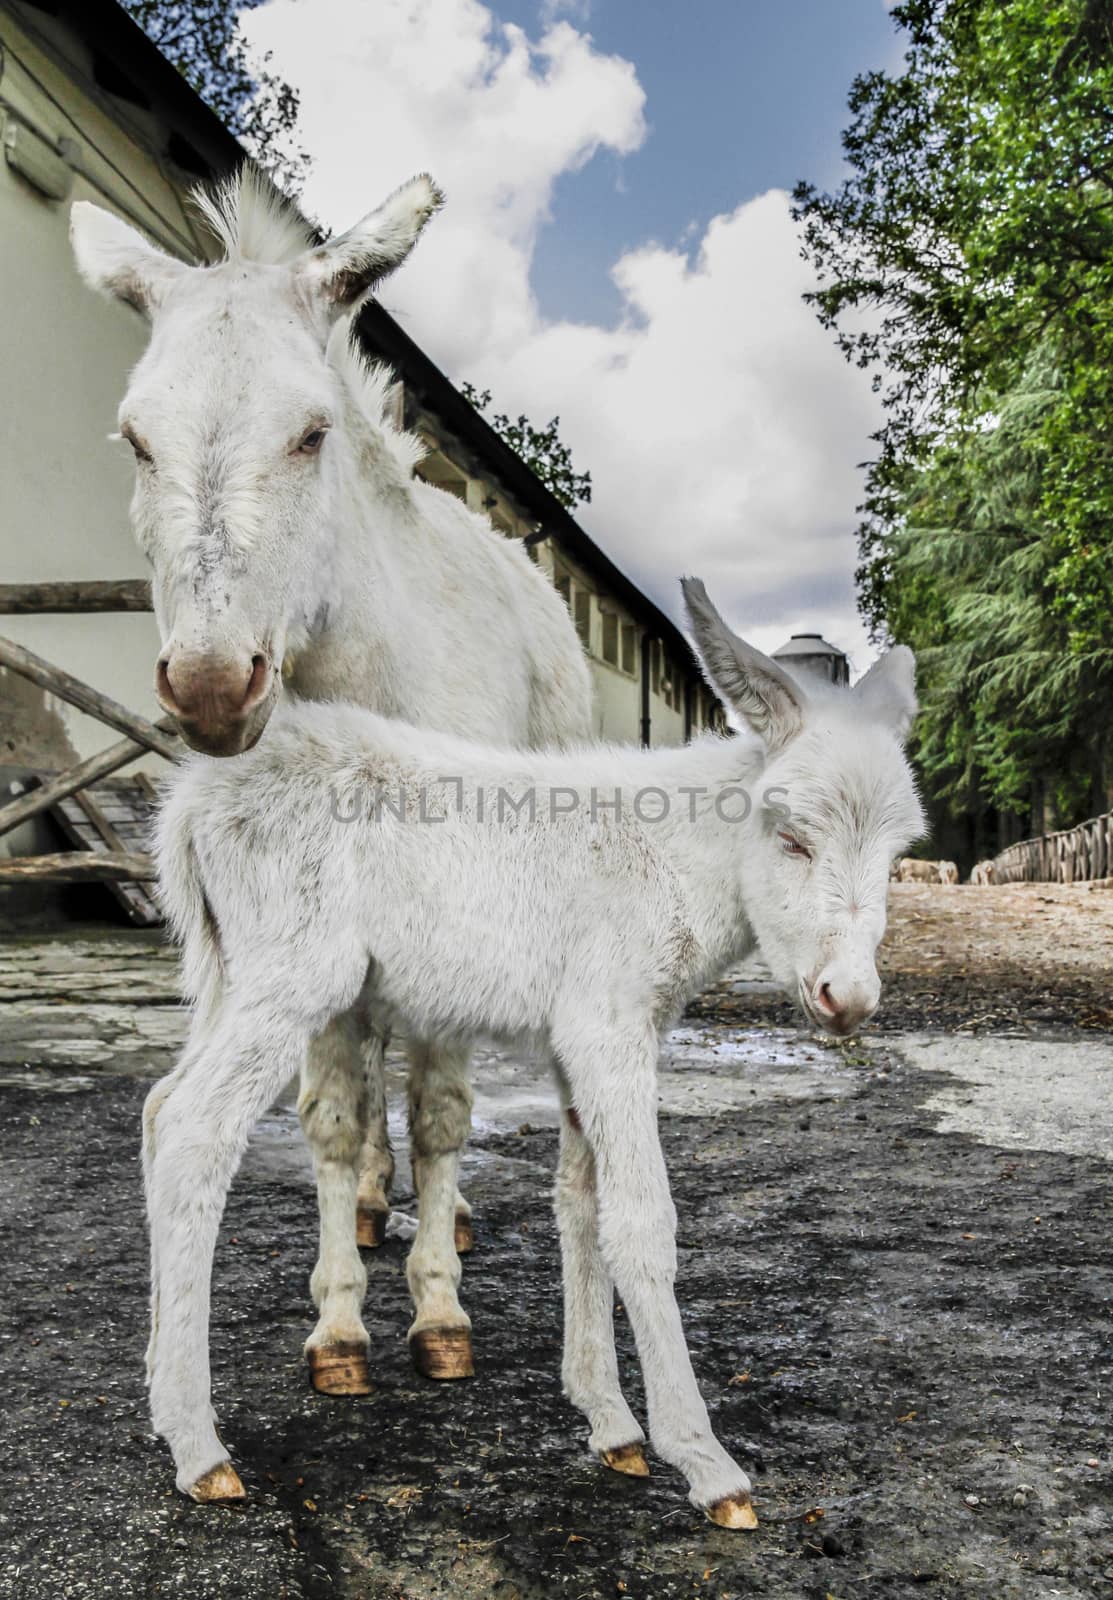 Puppy of white donkey, typical Sardinian breed, just born a three hours, posing with the tired mother for childbirth